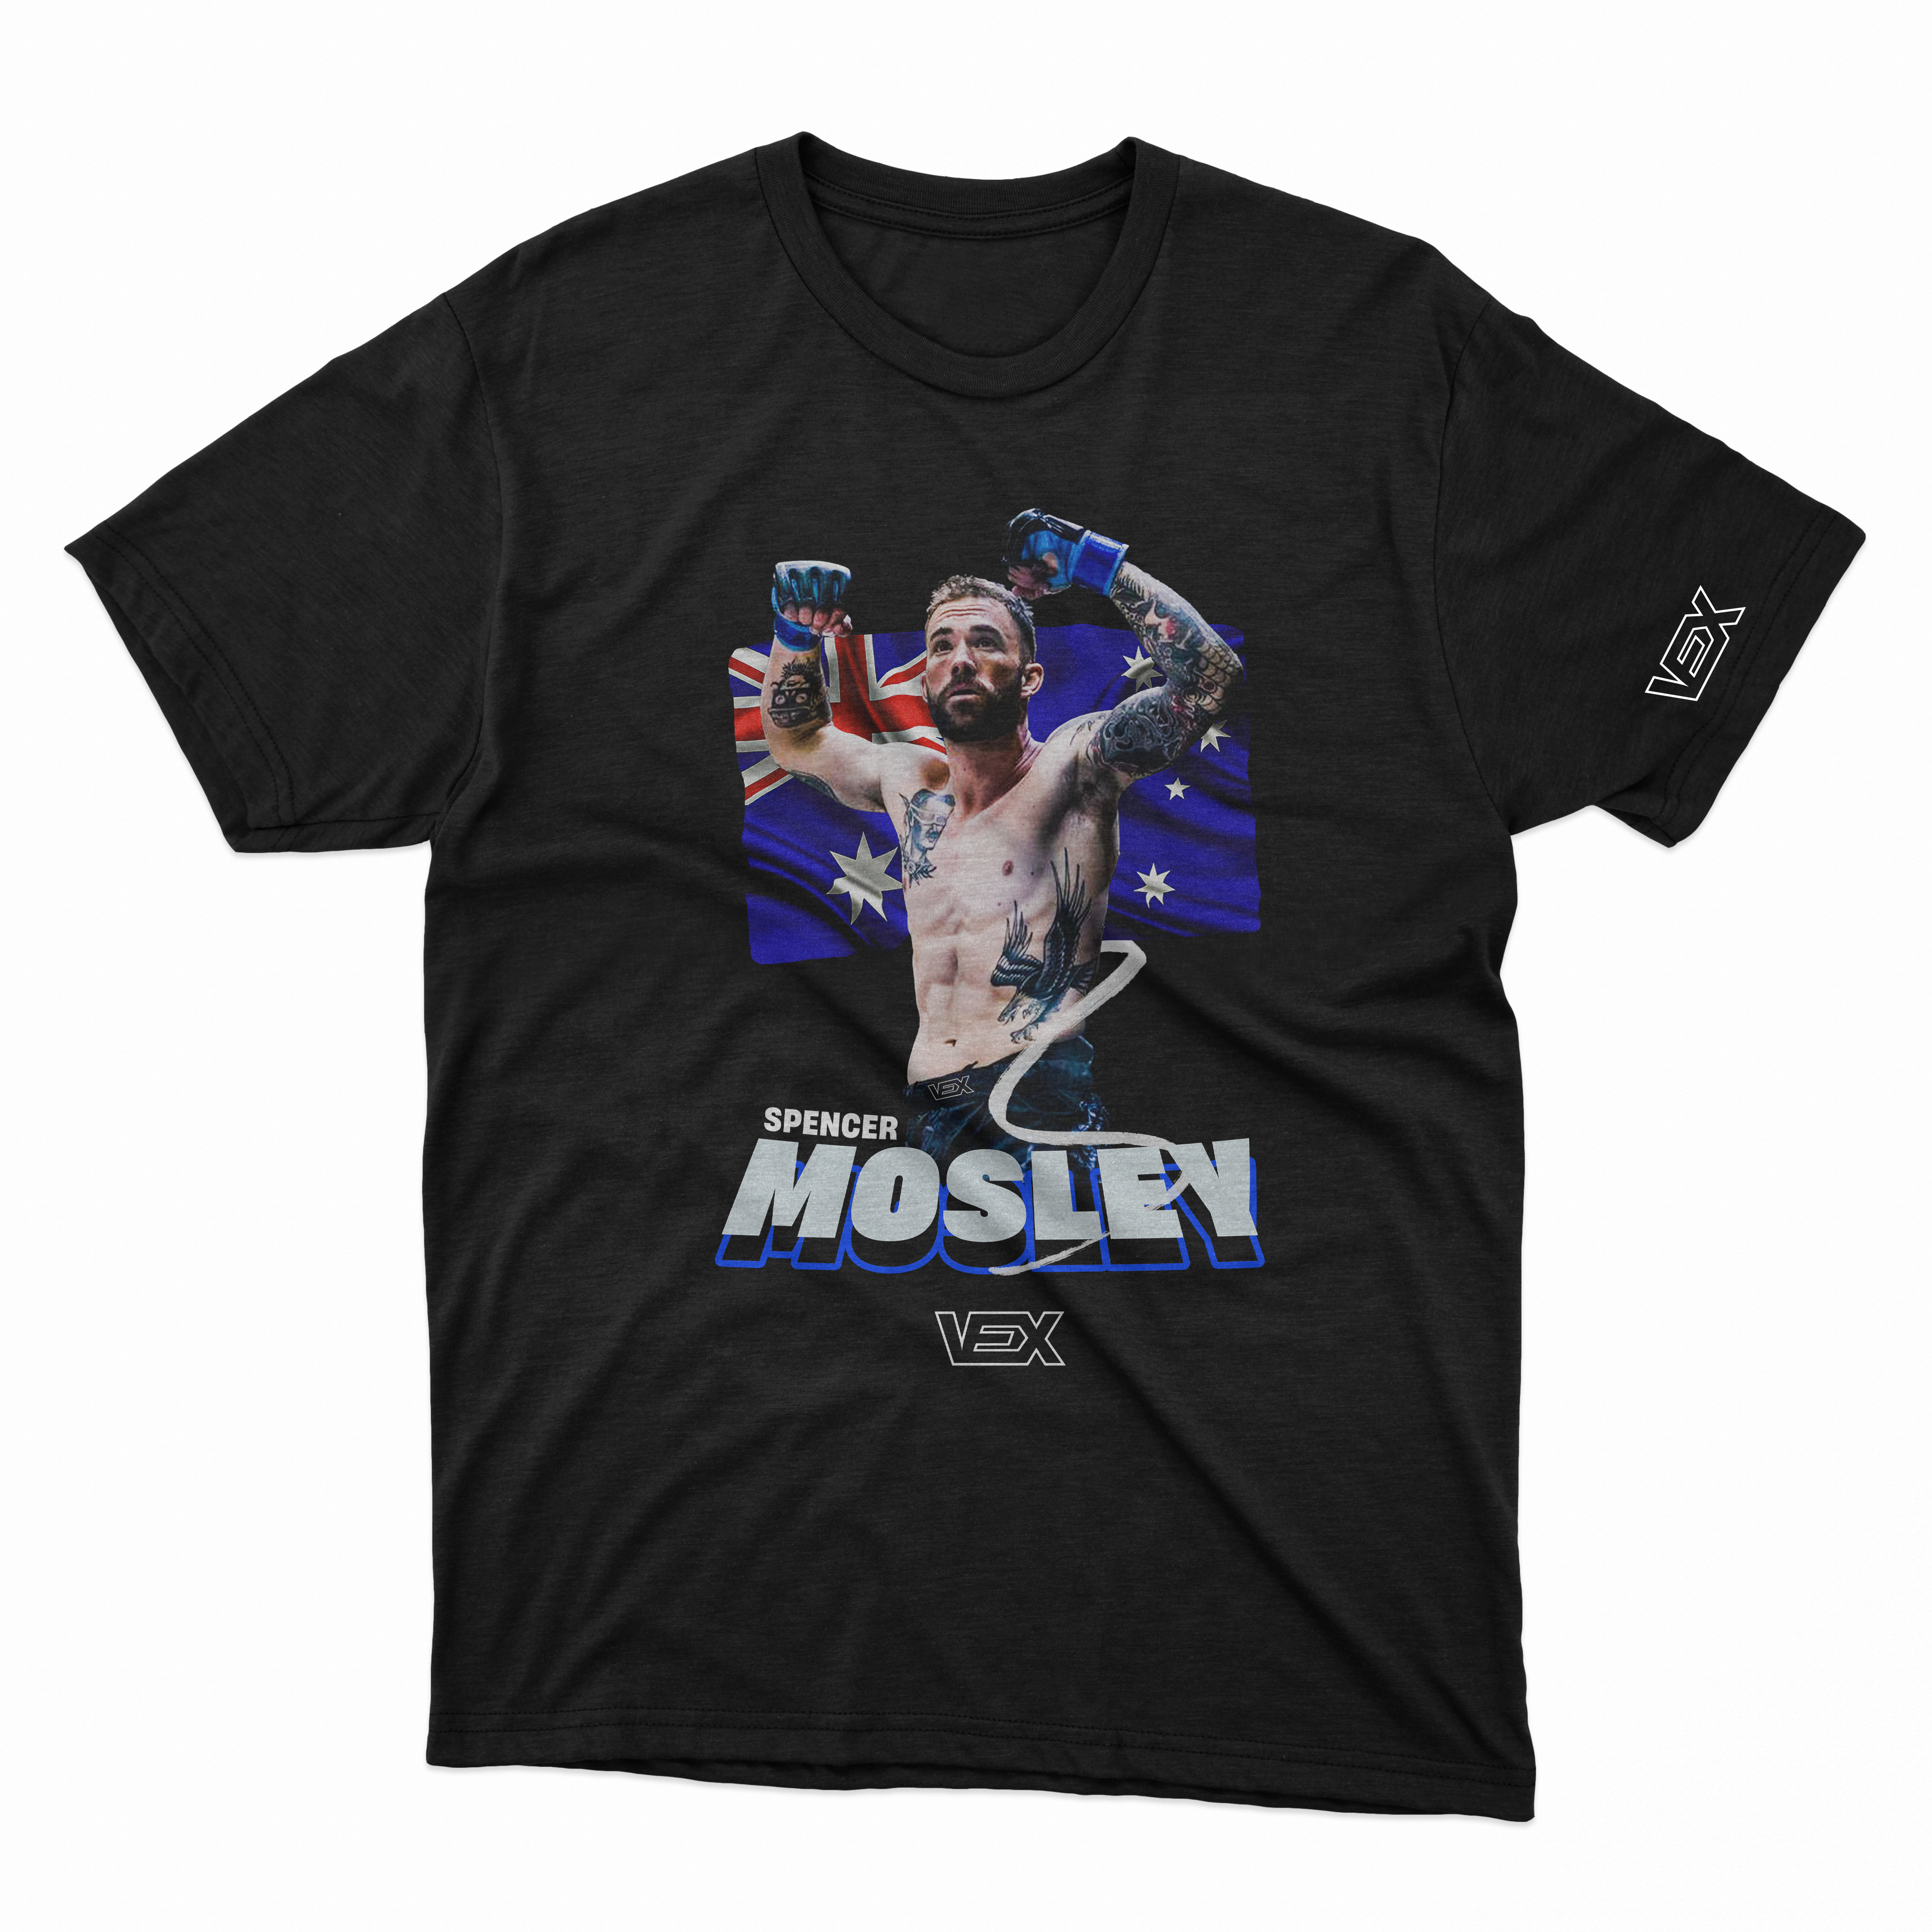 Spencer Mosley Supporter T-Shirt